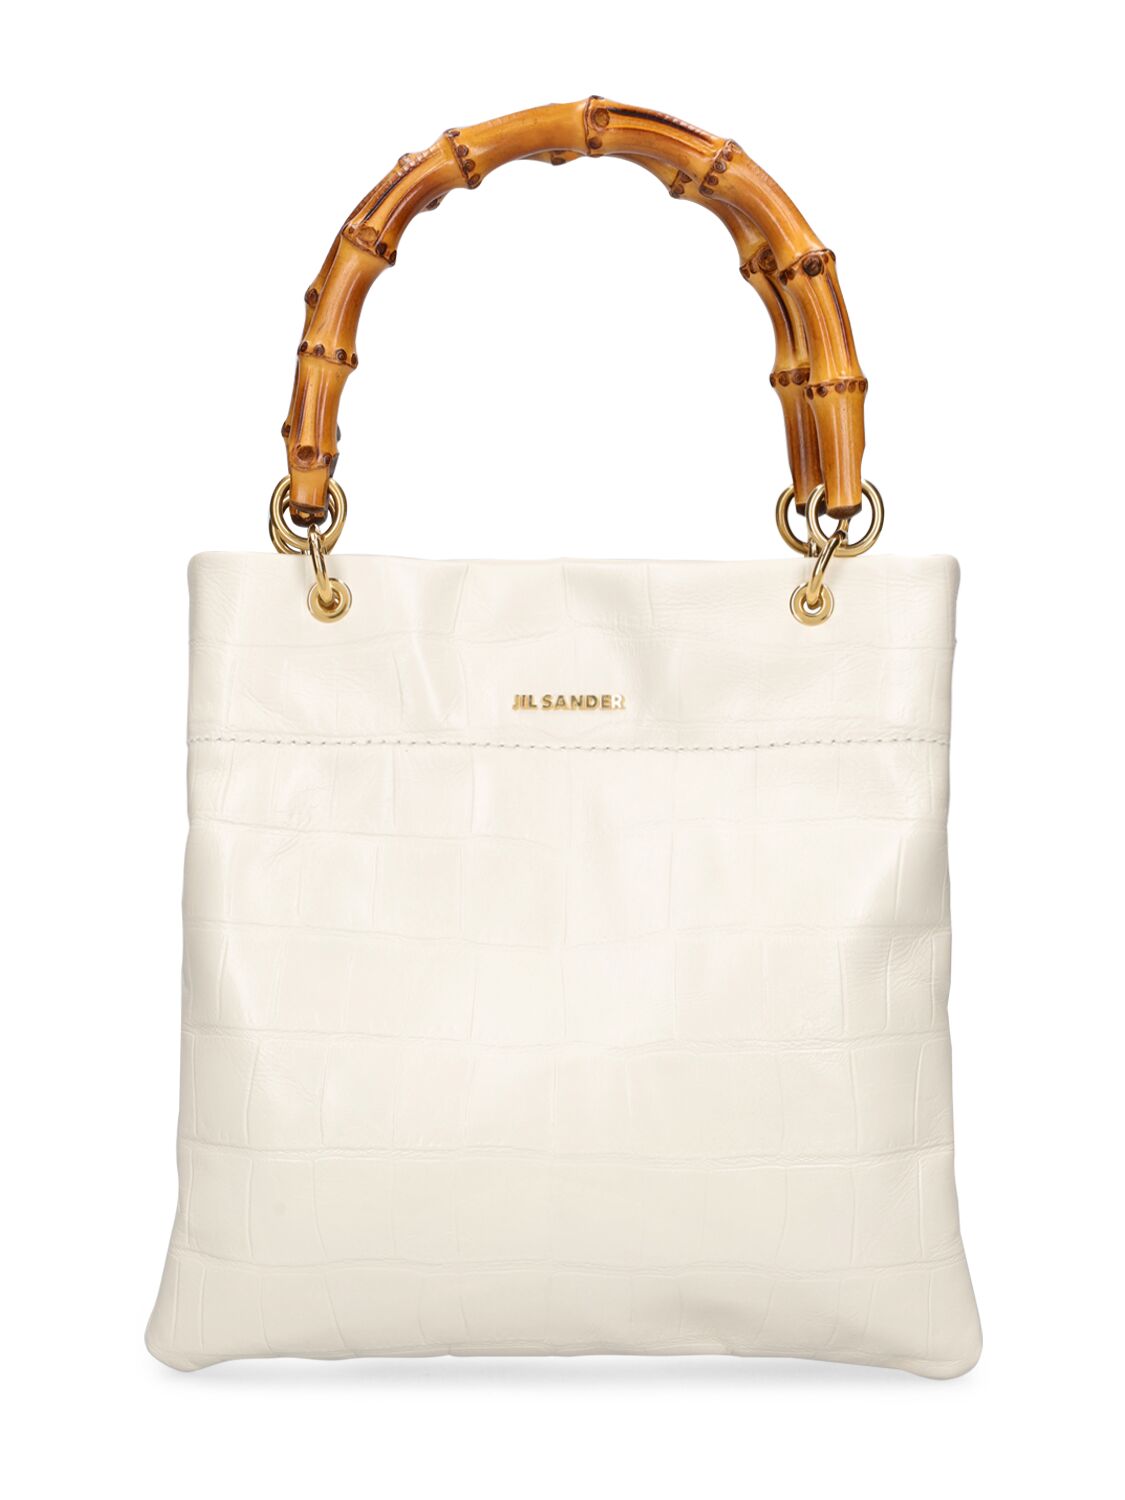 Jil Sander Small Leather Top Handle Bag In Eggshell